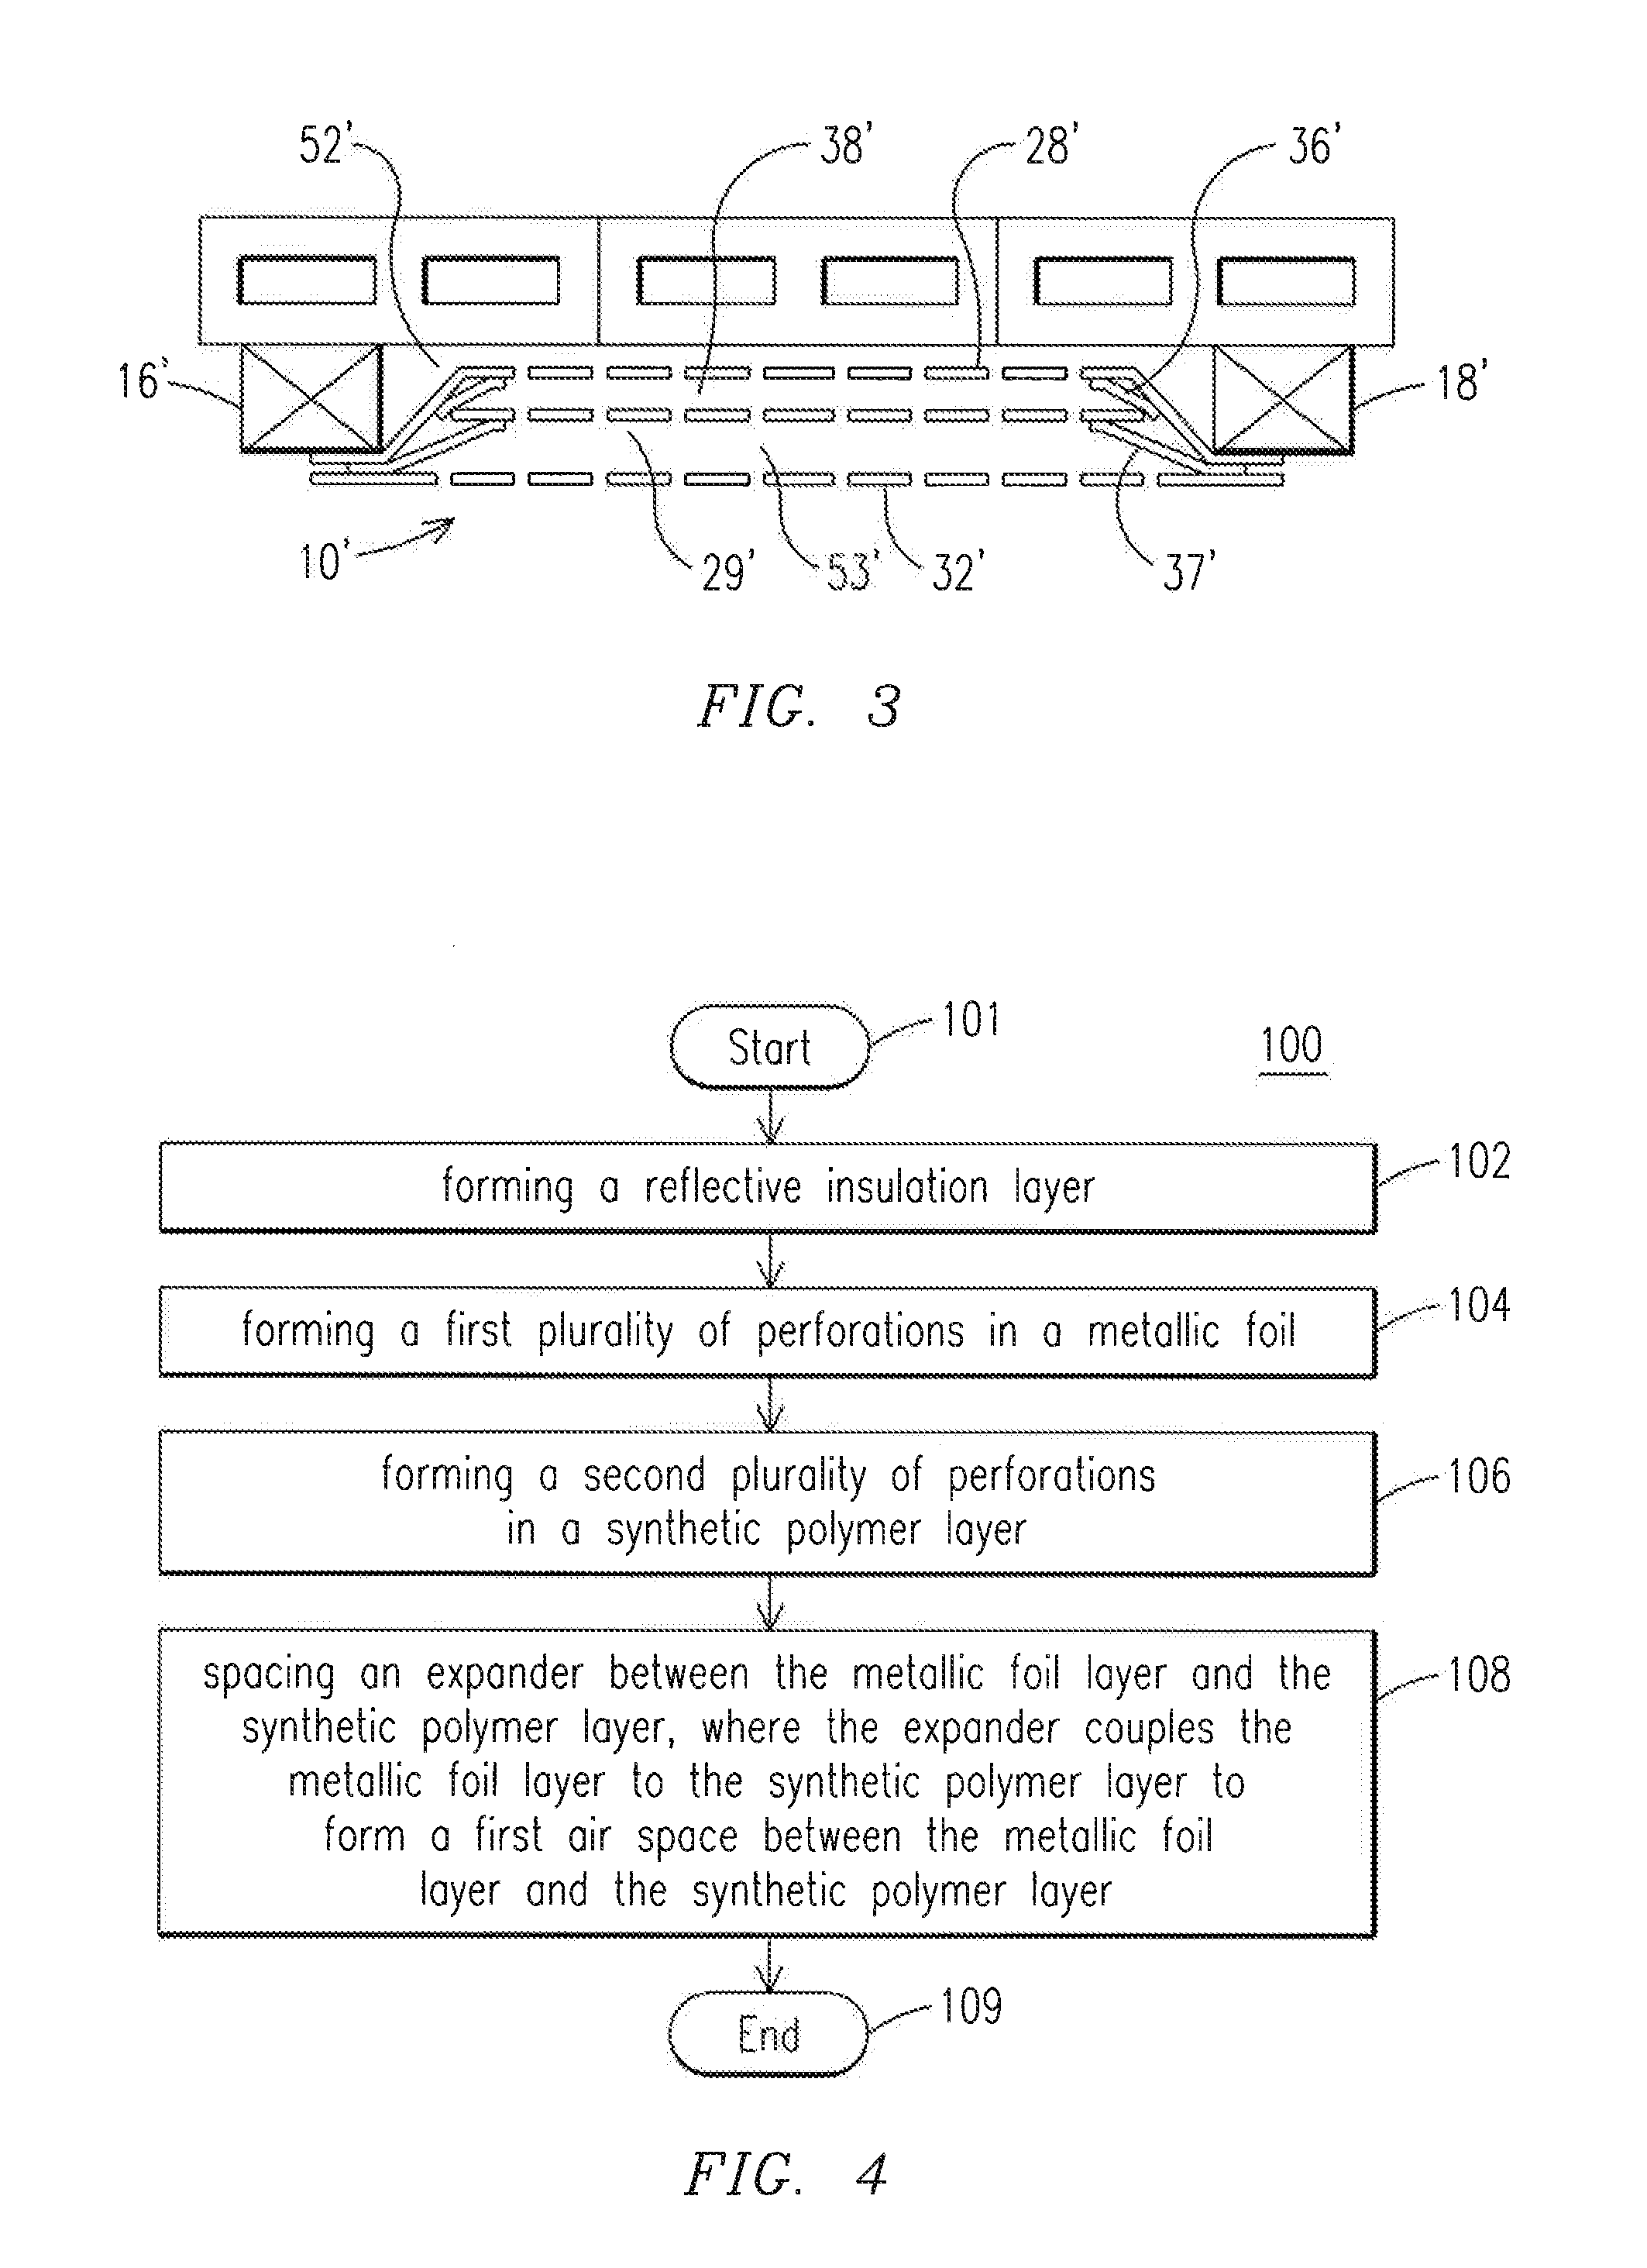 System and method for providing a reflective insulation layer